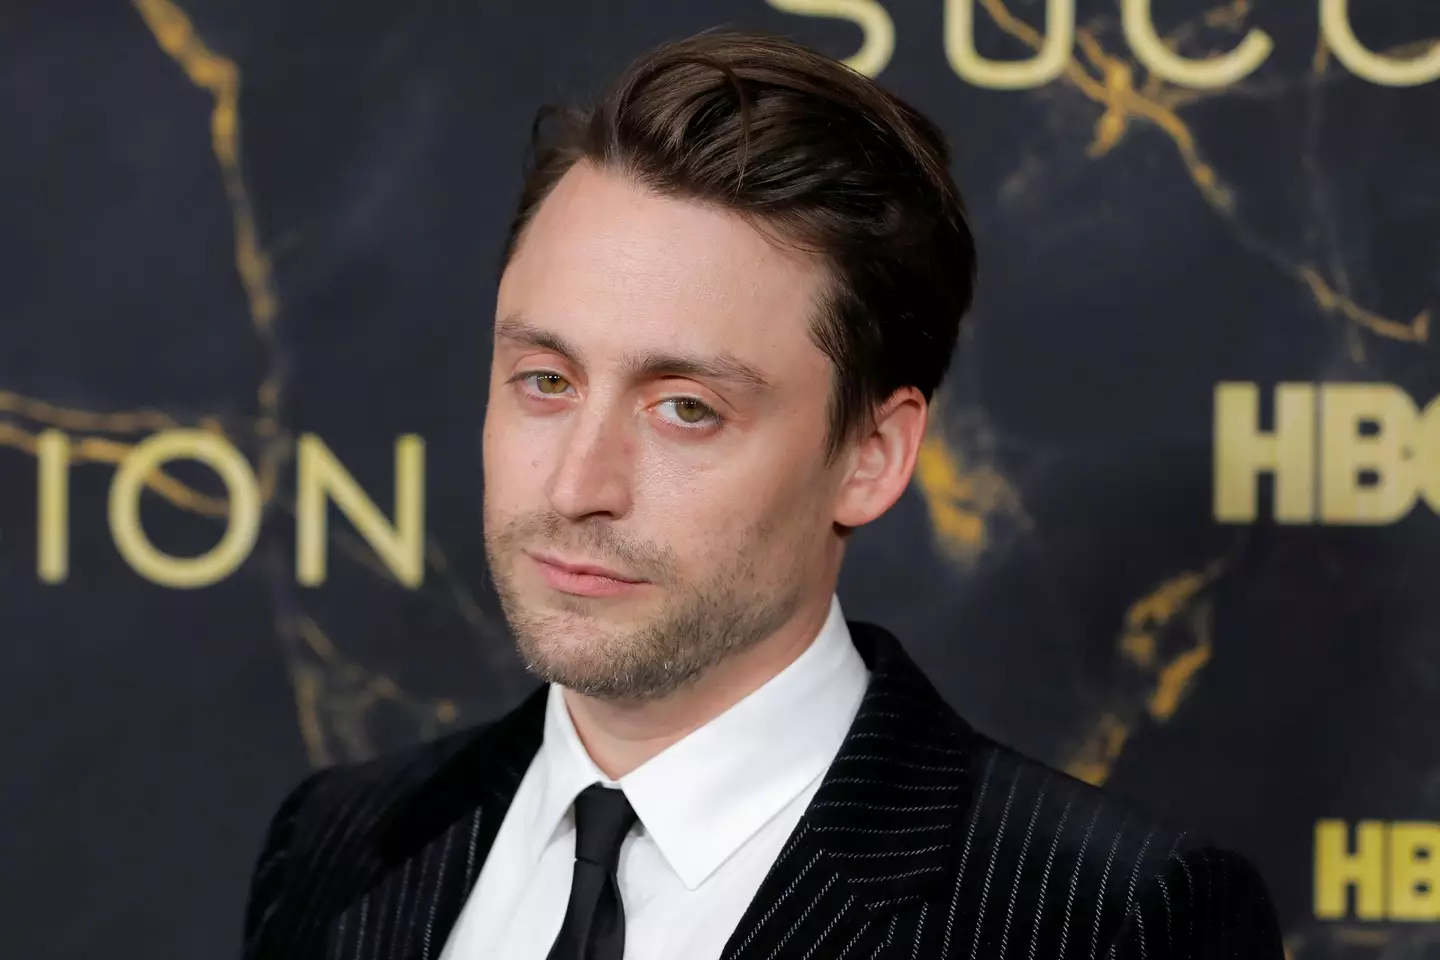 Kieran Culkin has not yet made a visit to see his own newborn nephew.